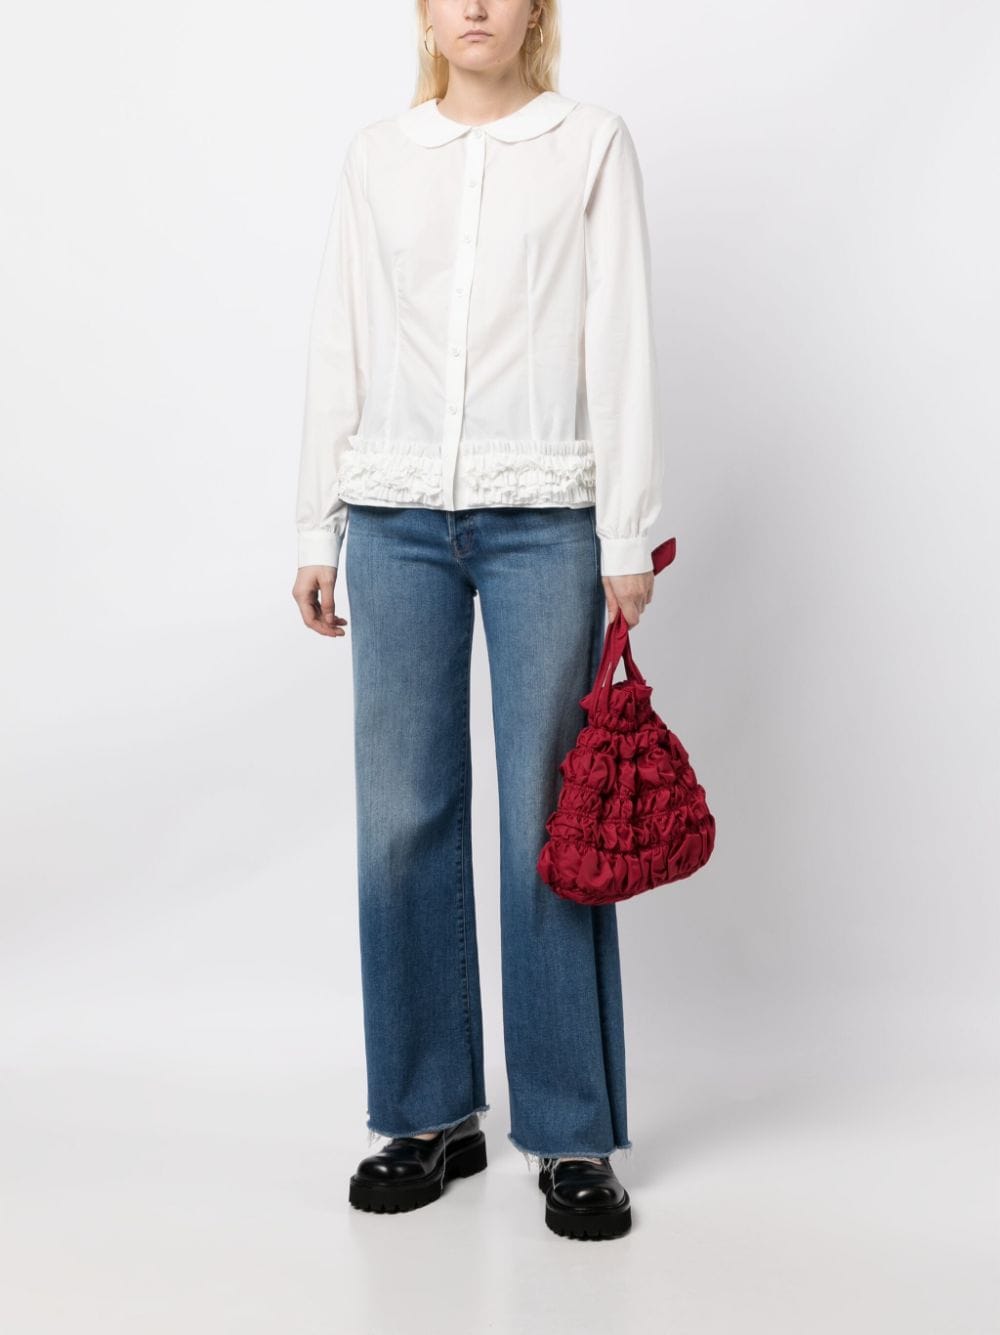 Molly Goddard Blouse met ruches - Wit